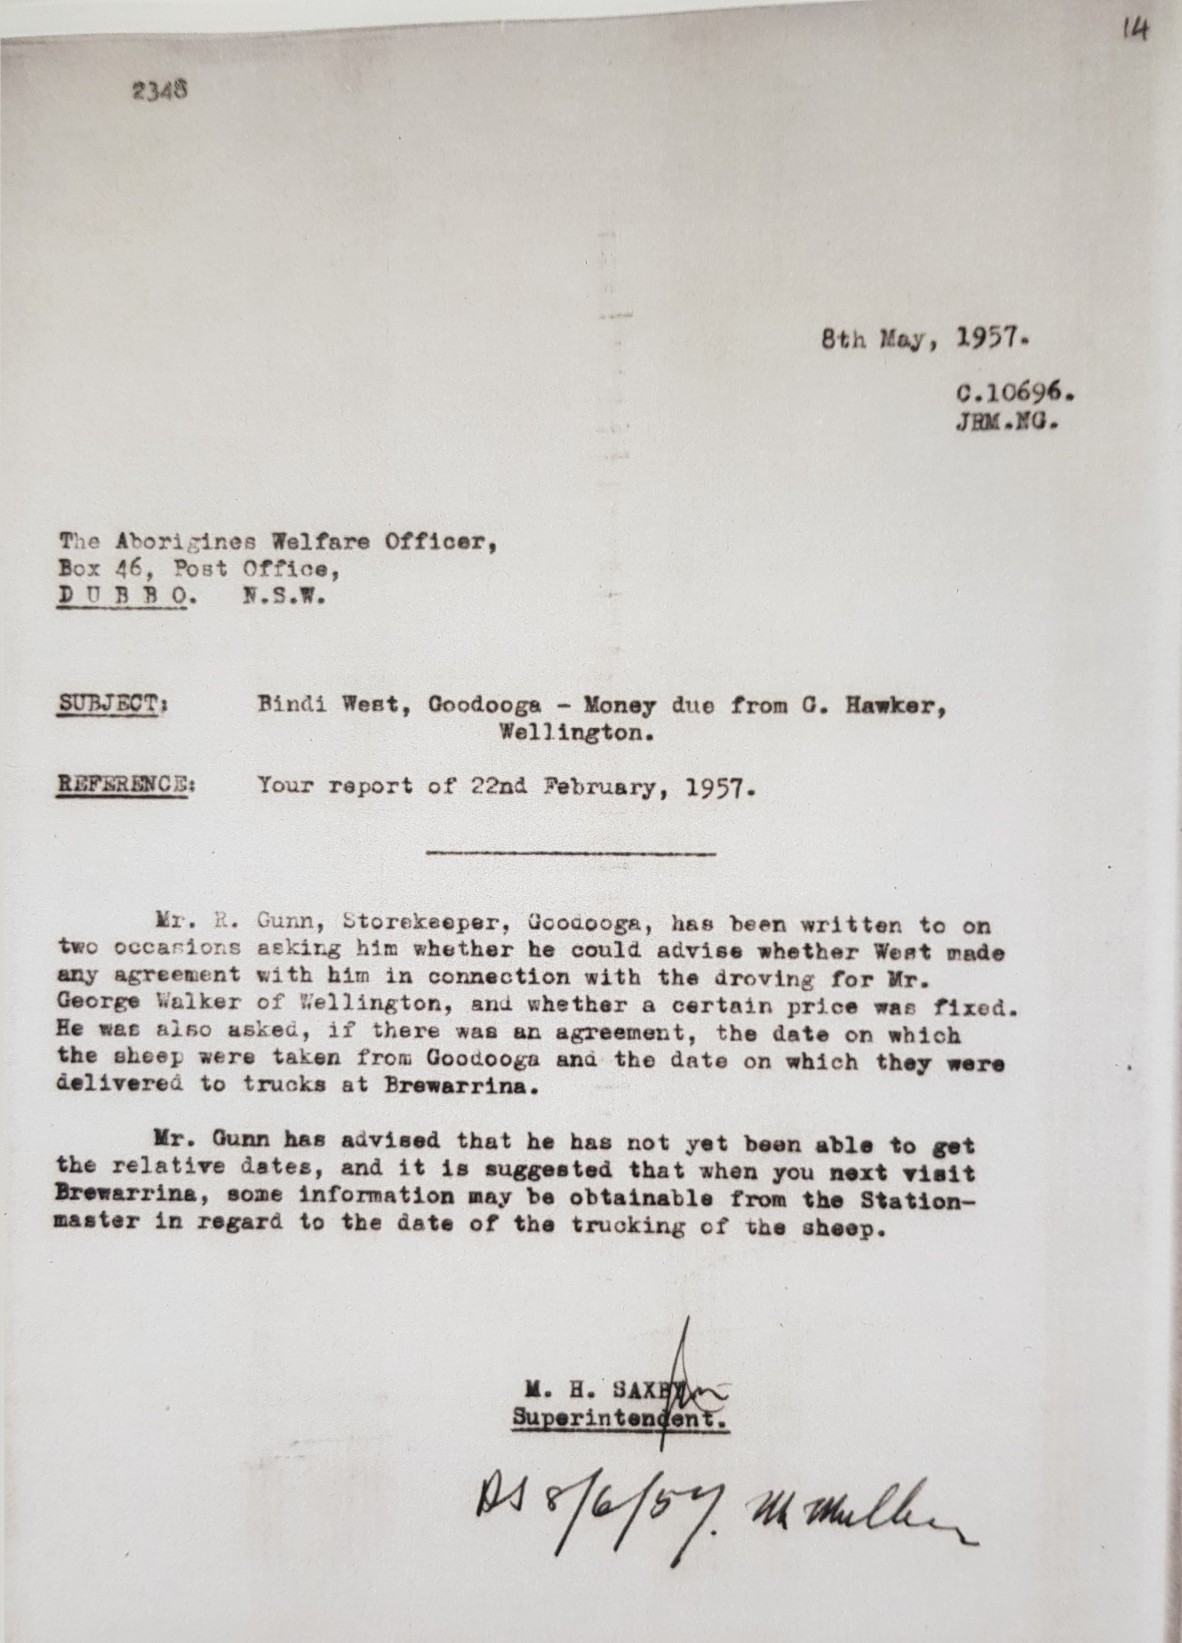 Saxby then writes to Felton at The Aborigines Welfare Board, Dubbo on 8th May 1957, to ask if he can try to find out the date the sheep were trucked, from the station master at Brewarrina, next time the Aborigines Welfare officer visits Brewarrina, as it is now another week after Gunn has informed Saxby he will try to find out date of delivery, & no further answer has been received from Storekeeper Gunn.